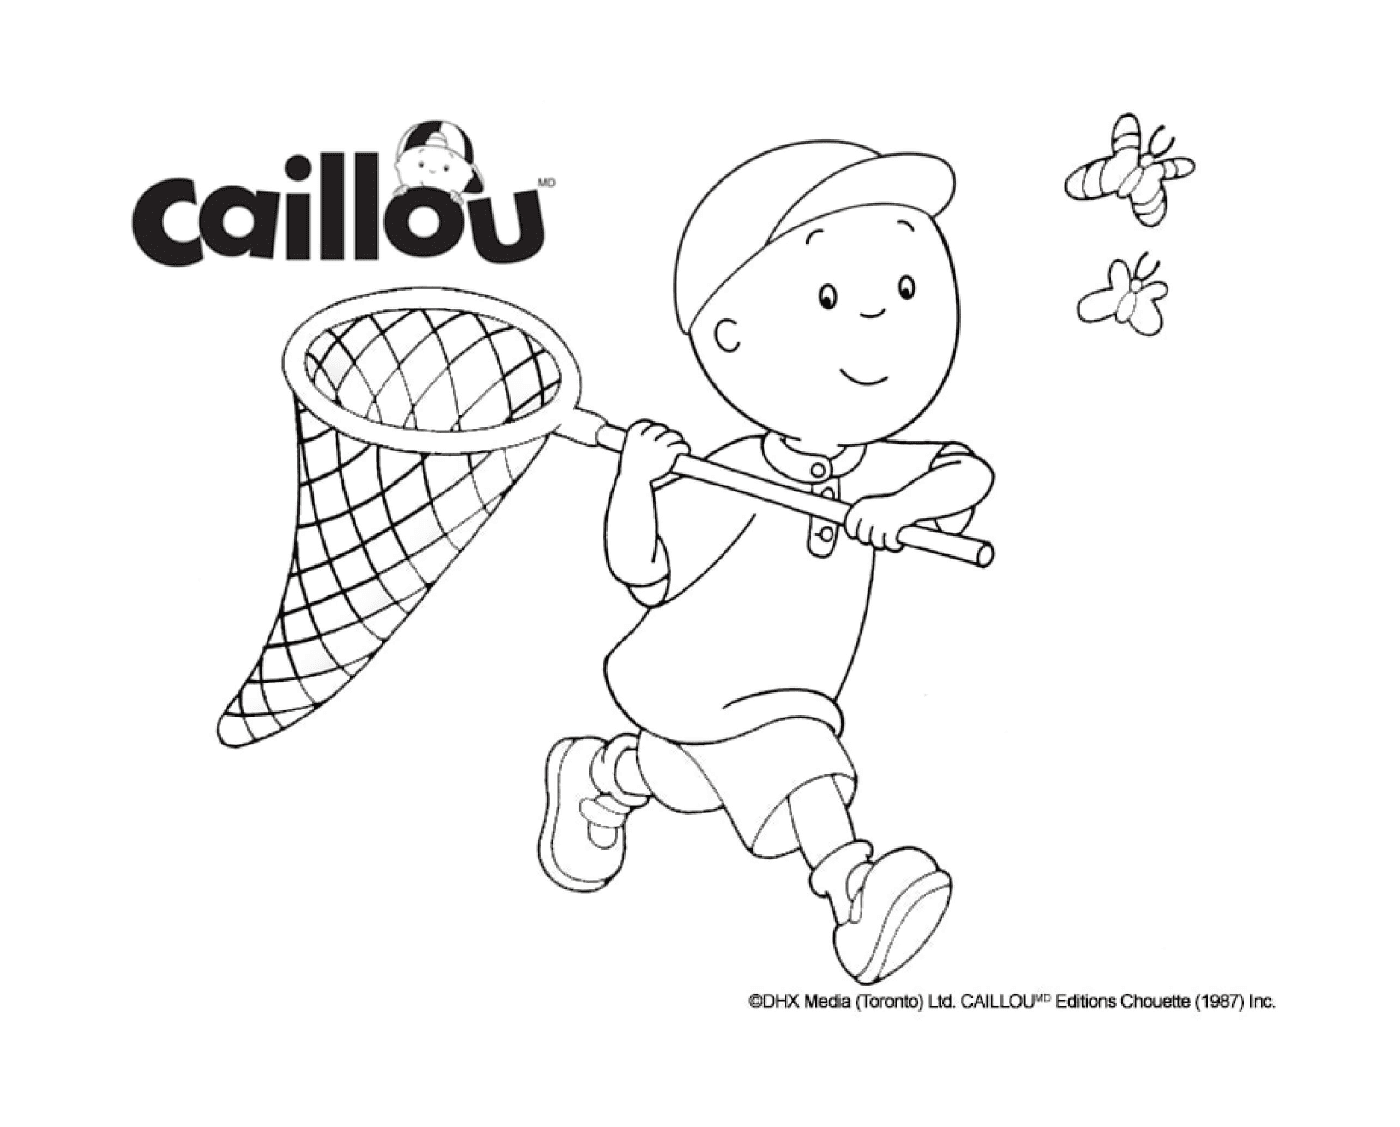   Caillou chasse les papillons 